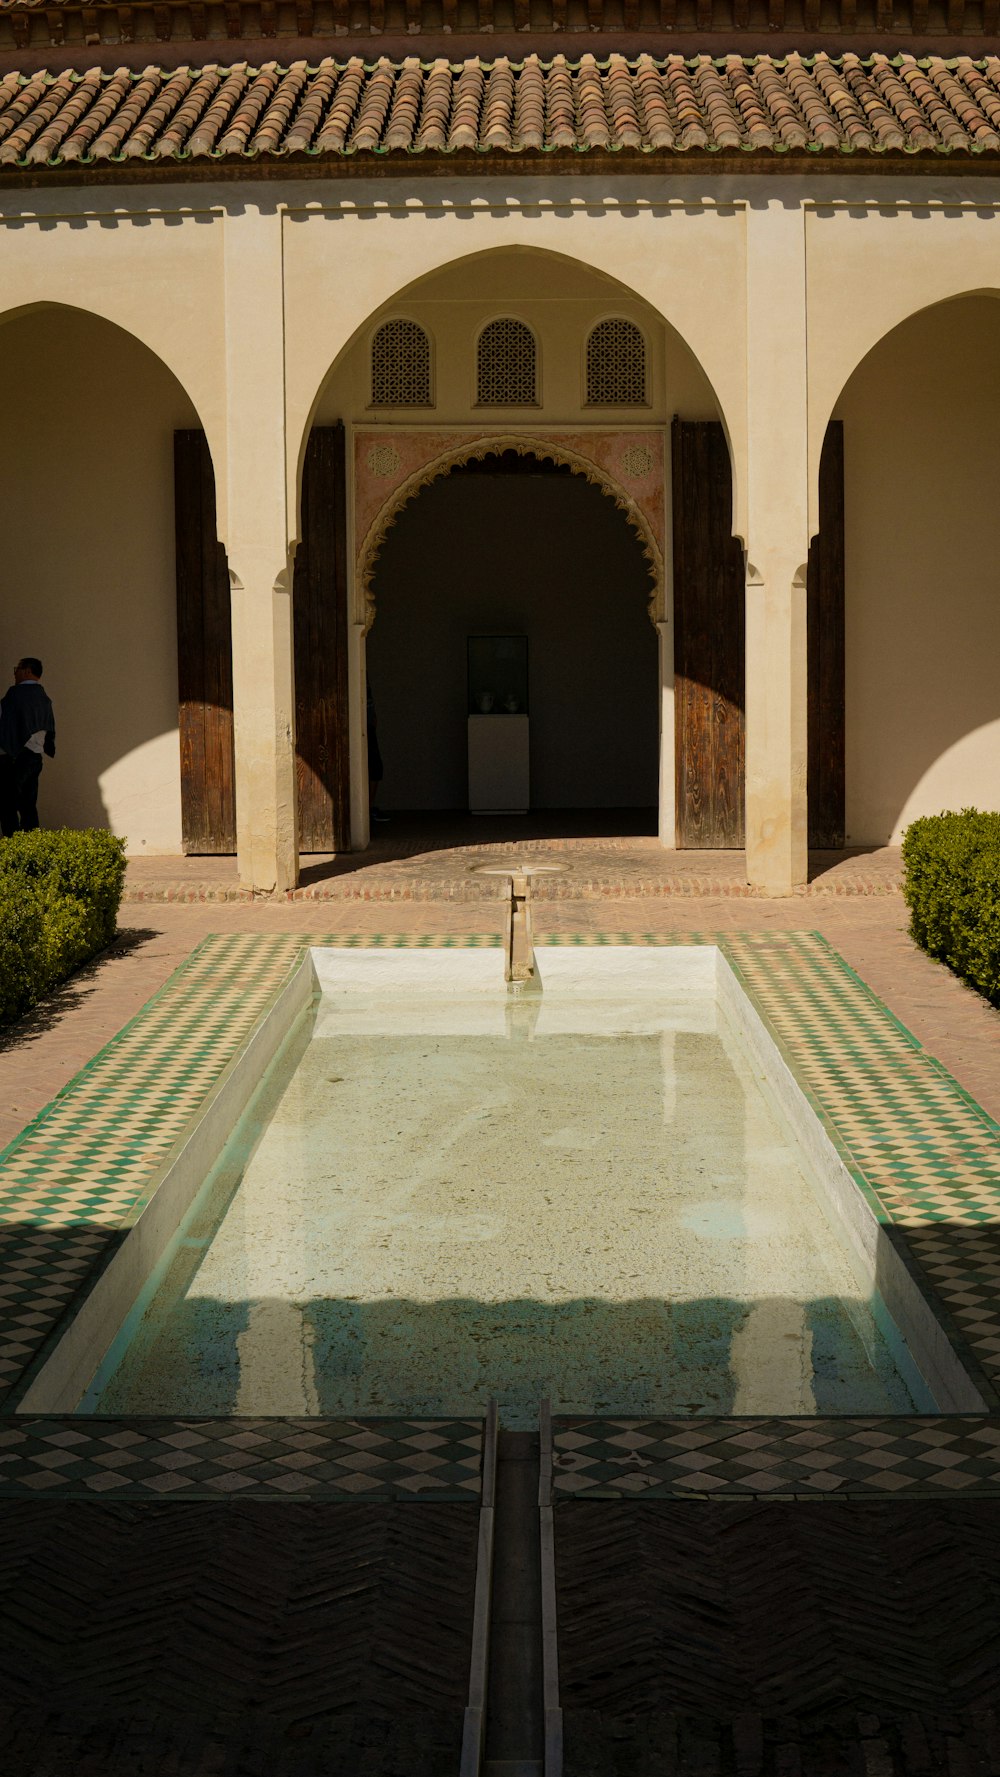 a pool in the middle of a courtyard